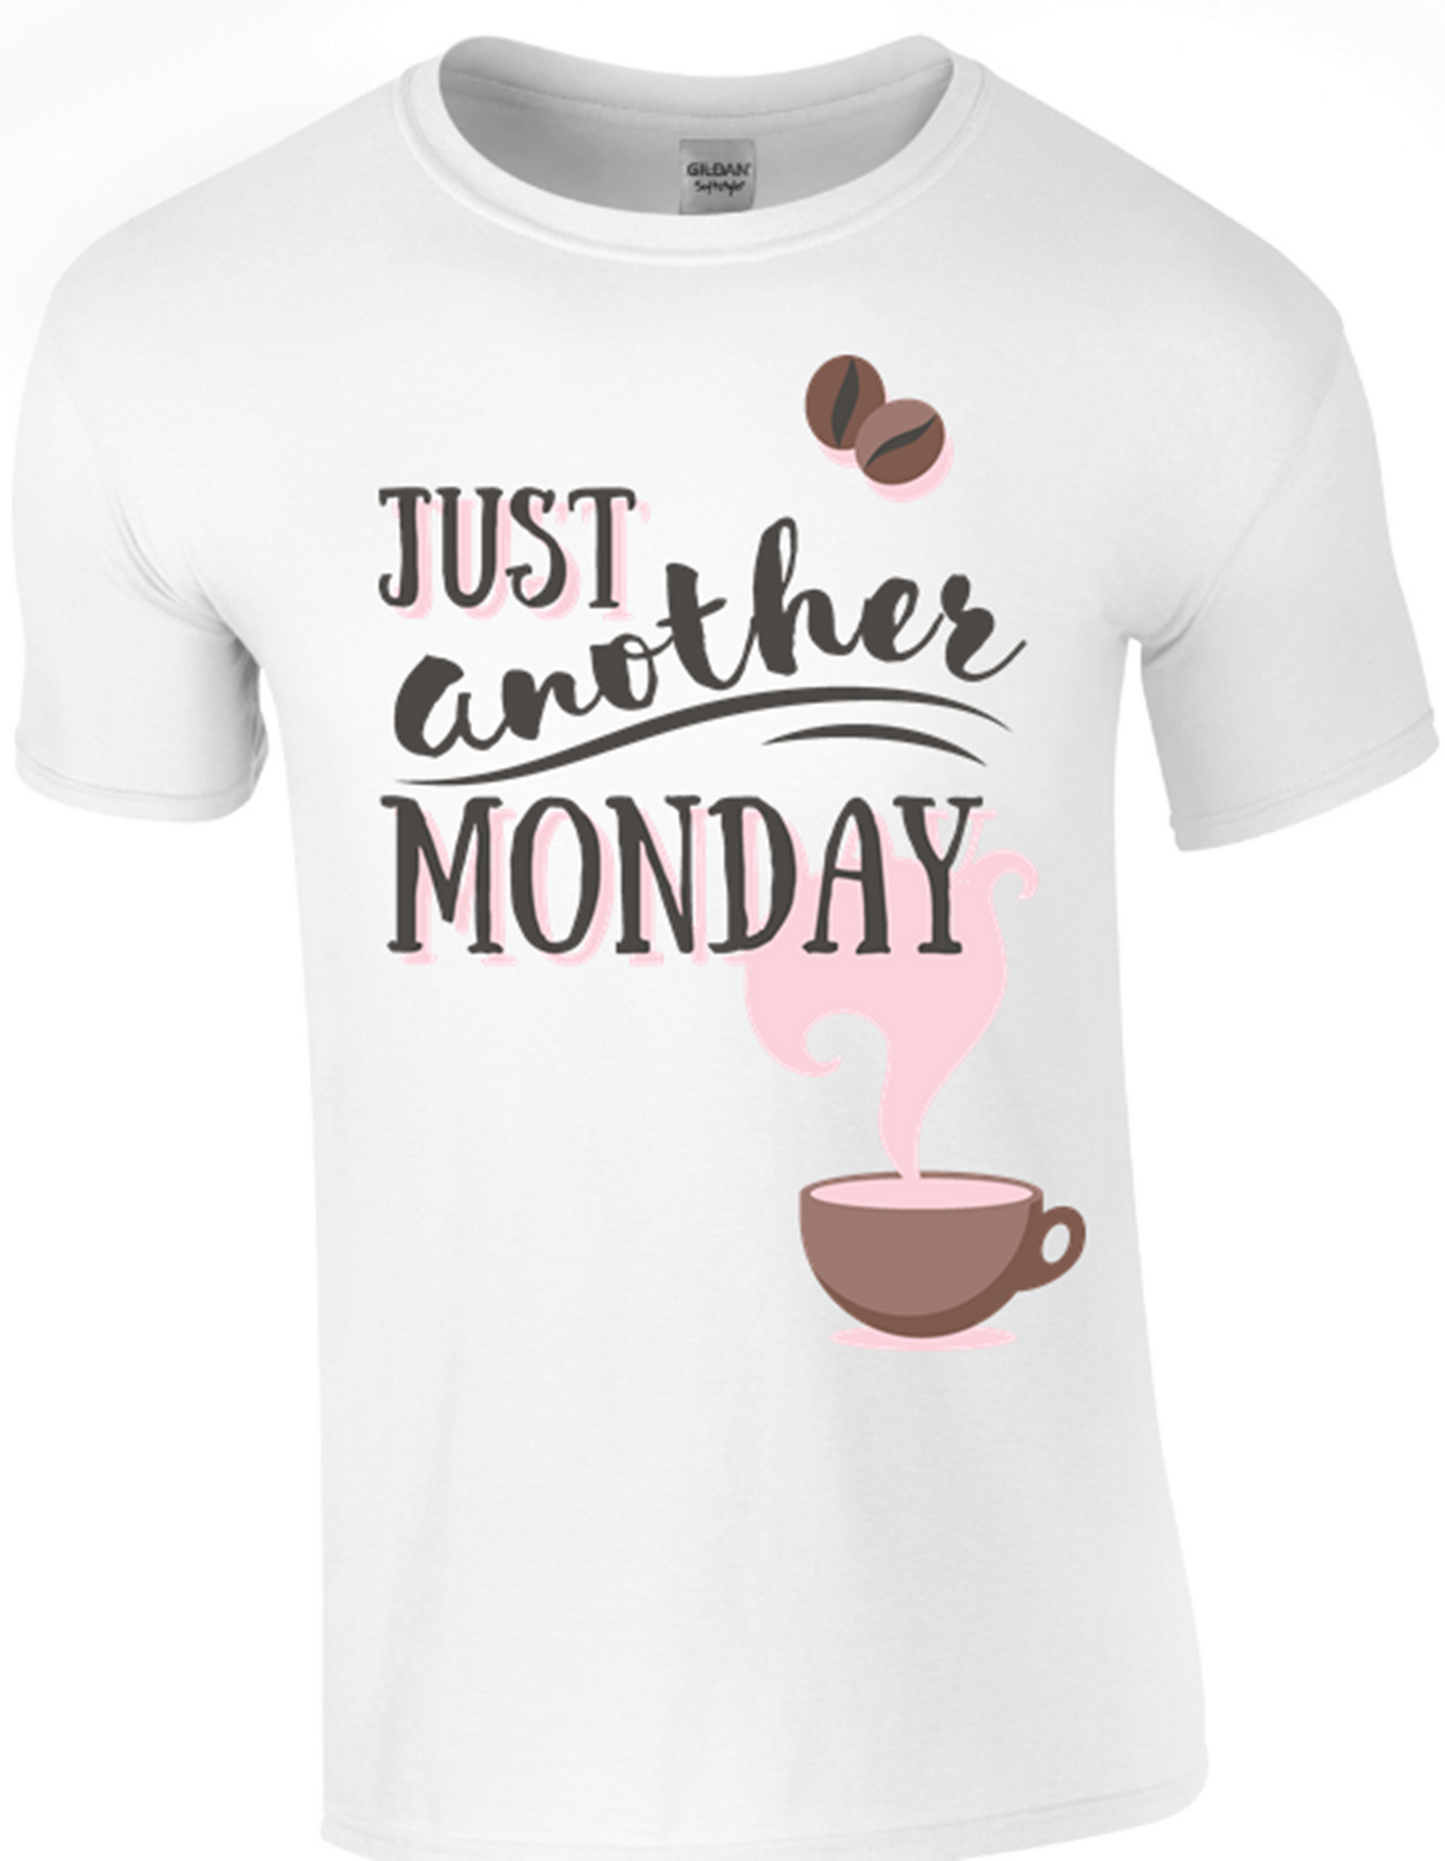 Just Another Monday T Shirt in White - Army 1157 kit S Army 1157 Kit Veterans Owned Business